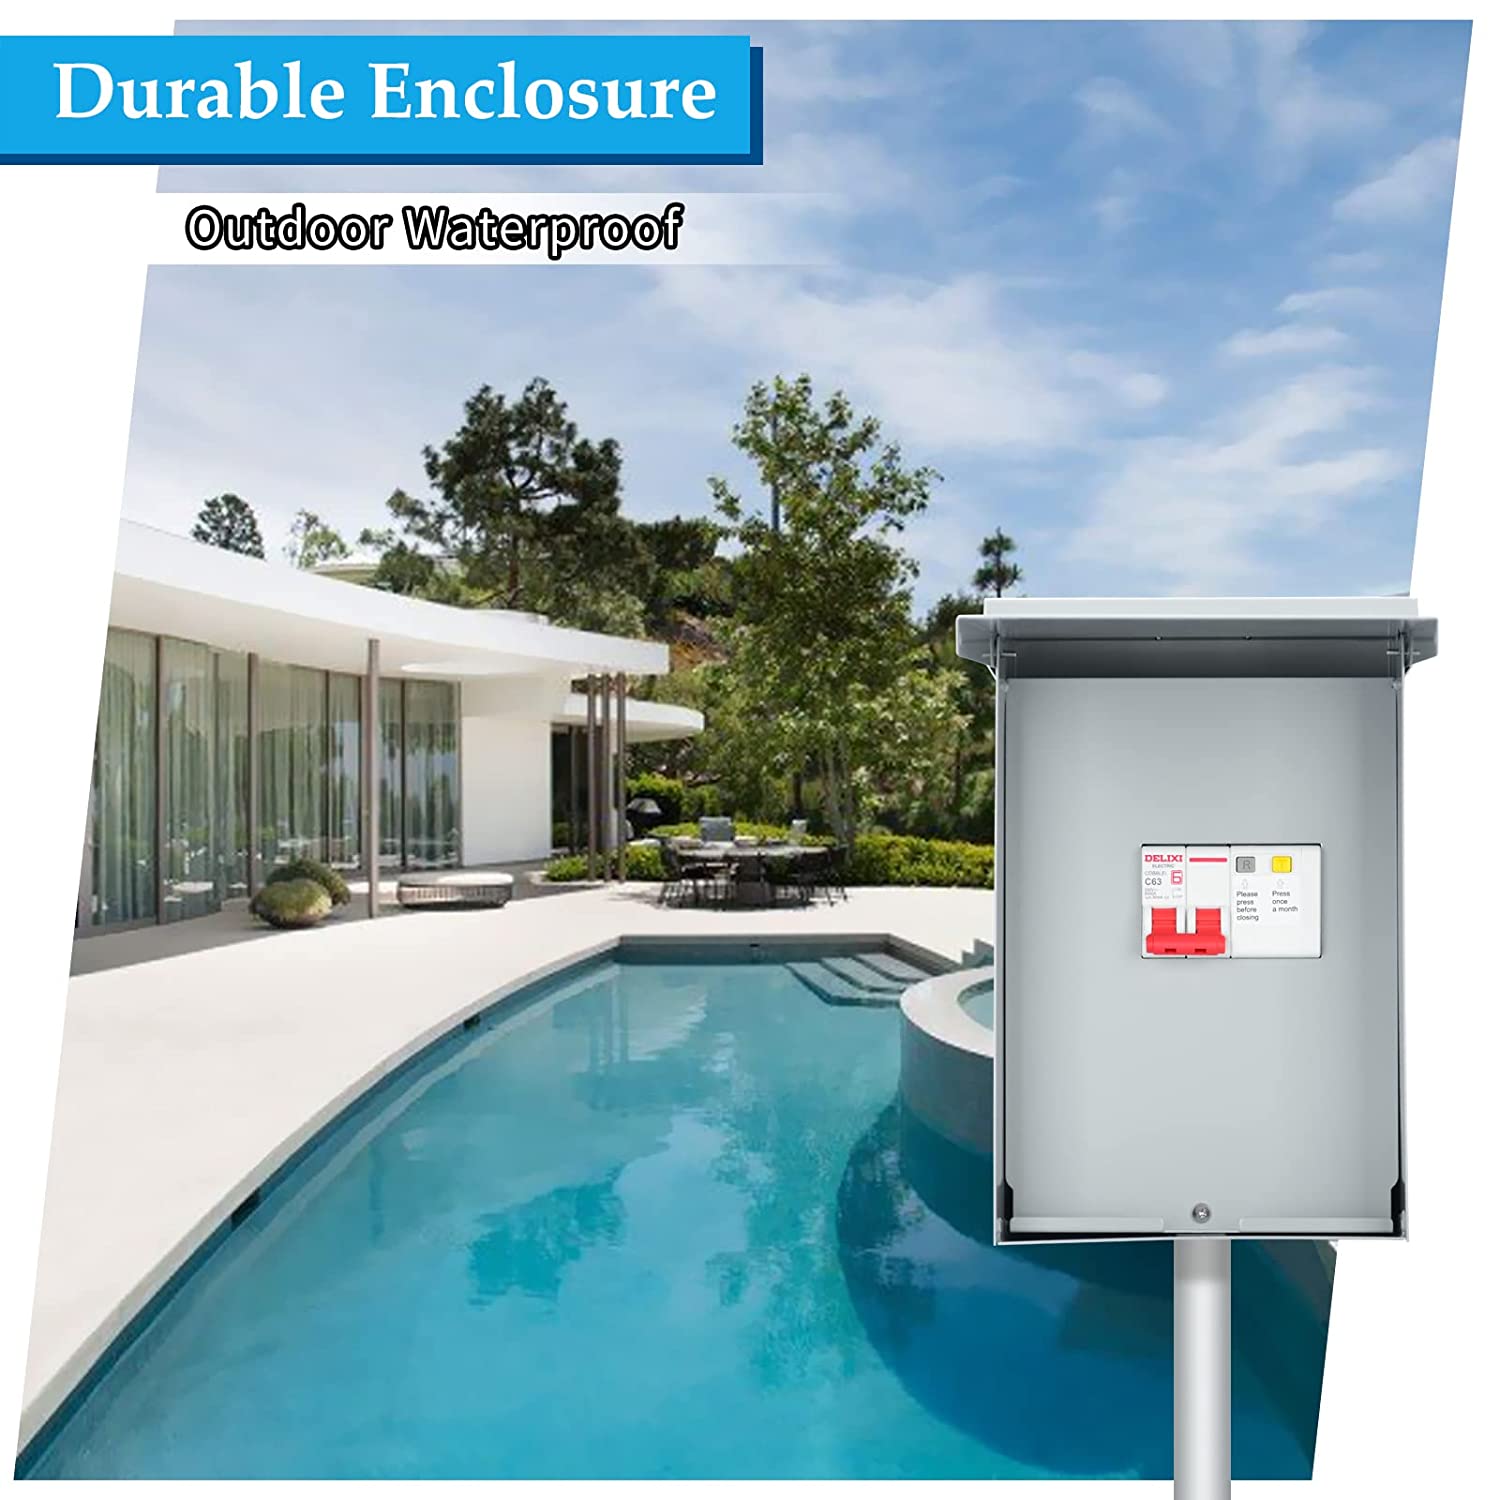 Briidea 50 Amp Spa Panel with 3-Pole 50 Amp GFCI Breaker, IP 65 Waterproof, Ideal for Spas, Hot Tubs, Swimming Pools, Home